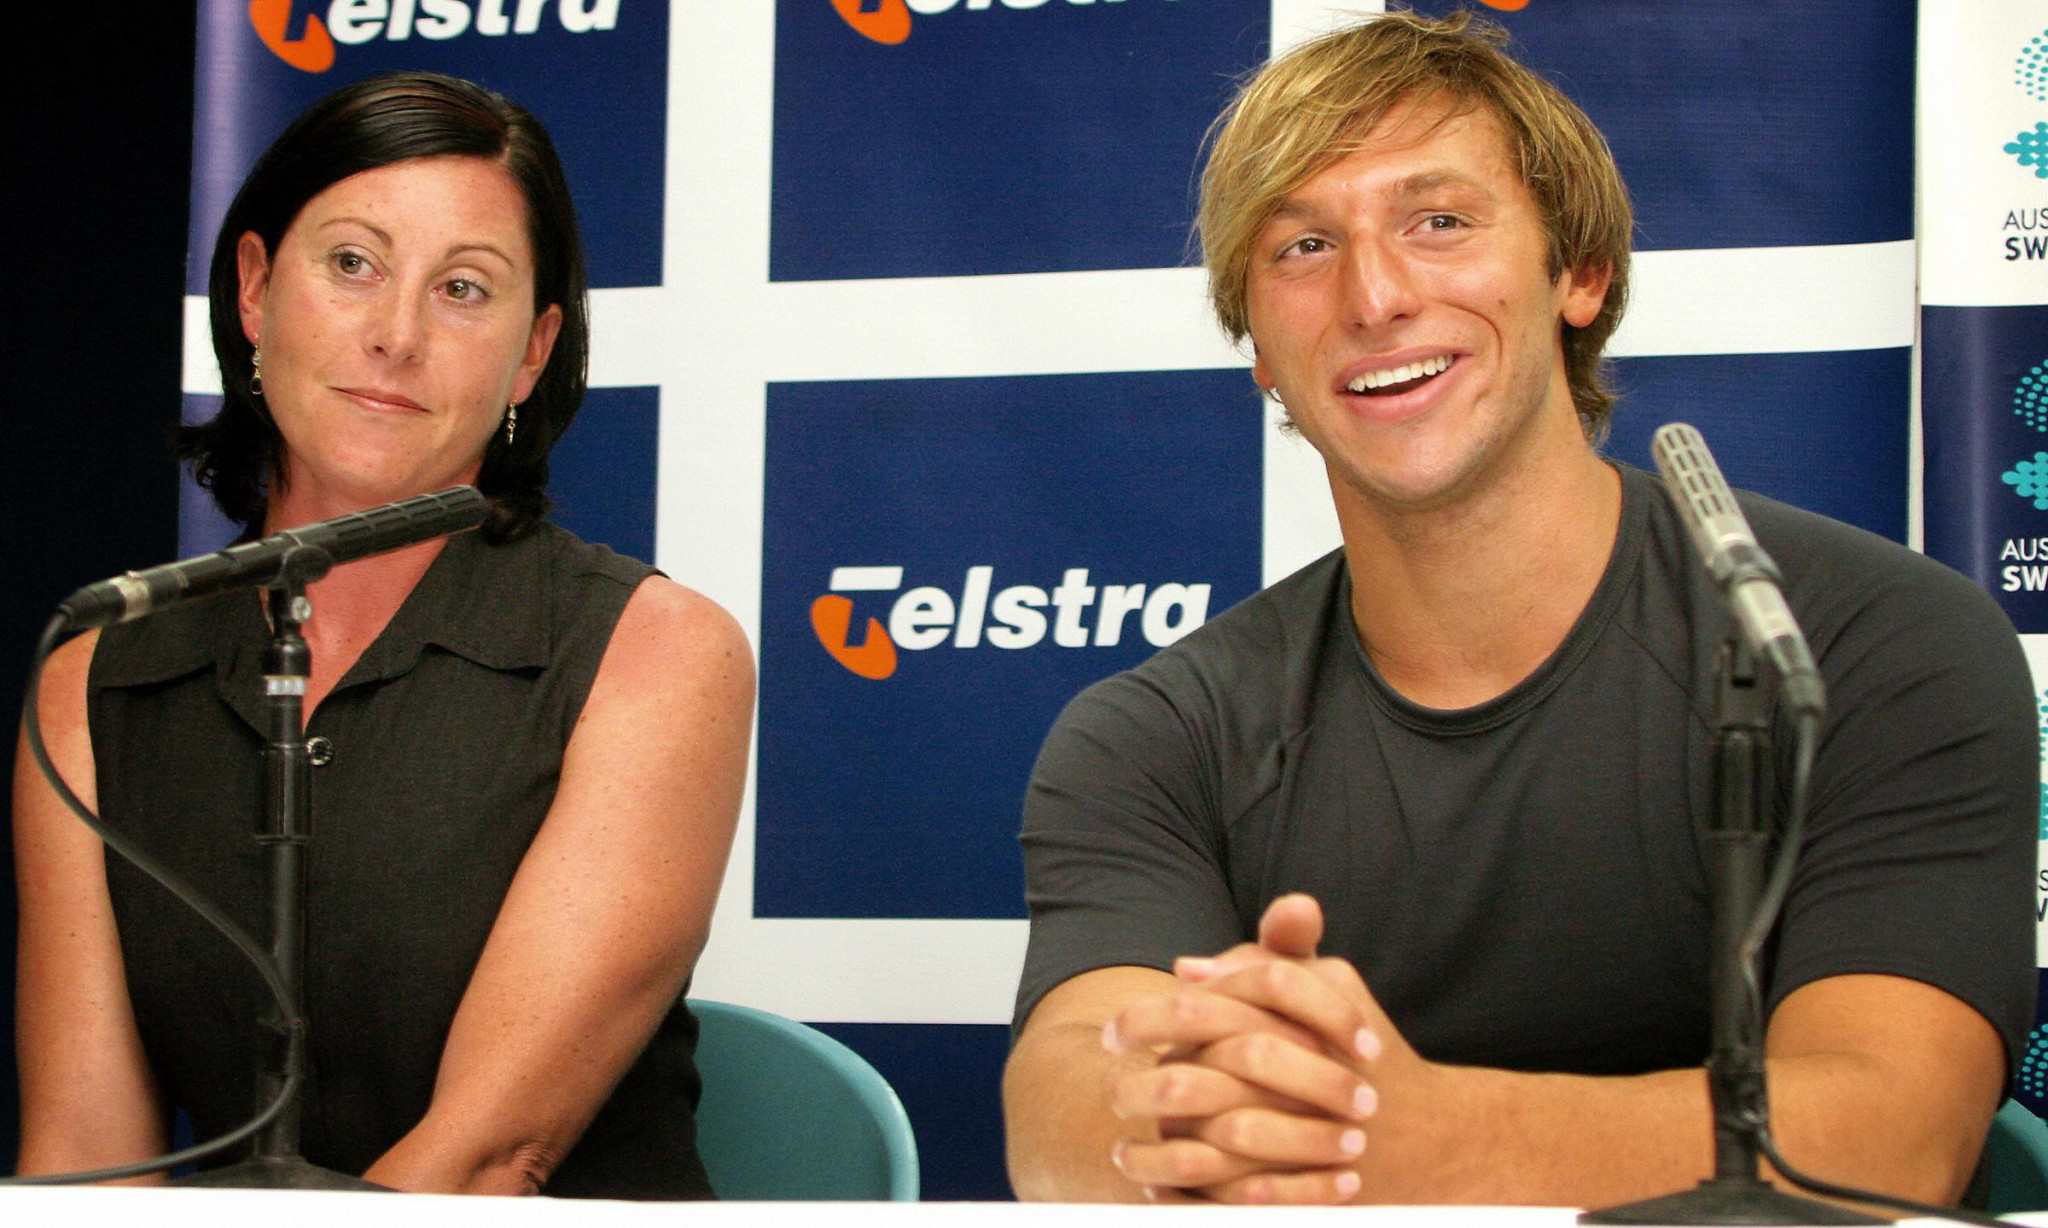 Tracey Menzies coached Ian Thorpe to Olympic gold medals in the 200m and 400m freestyle at Athens 2004 ©Getty Images